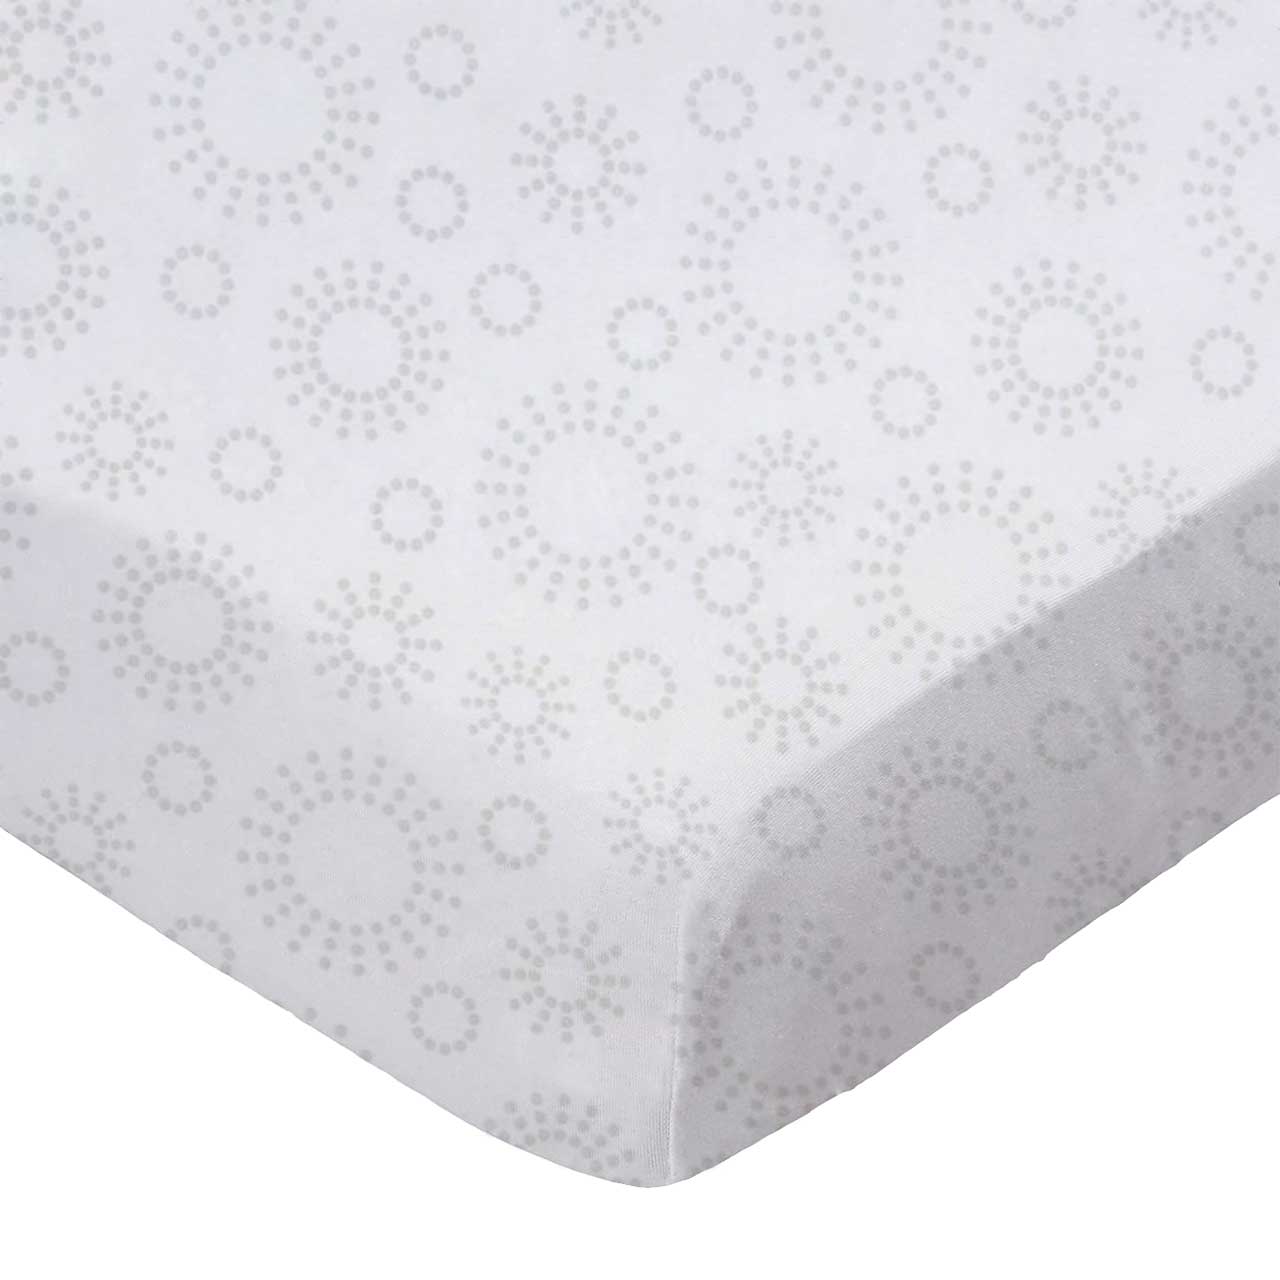 SheetWorld Fitted 100% Cotton Percale Pack N Play Sheet Fits Graco Square Play Yard 36 x 36, Grey Dot Circles - image 1 of 7